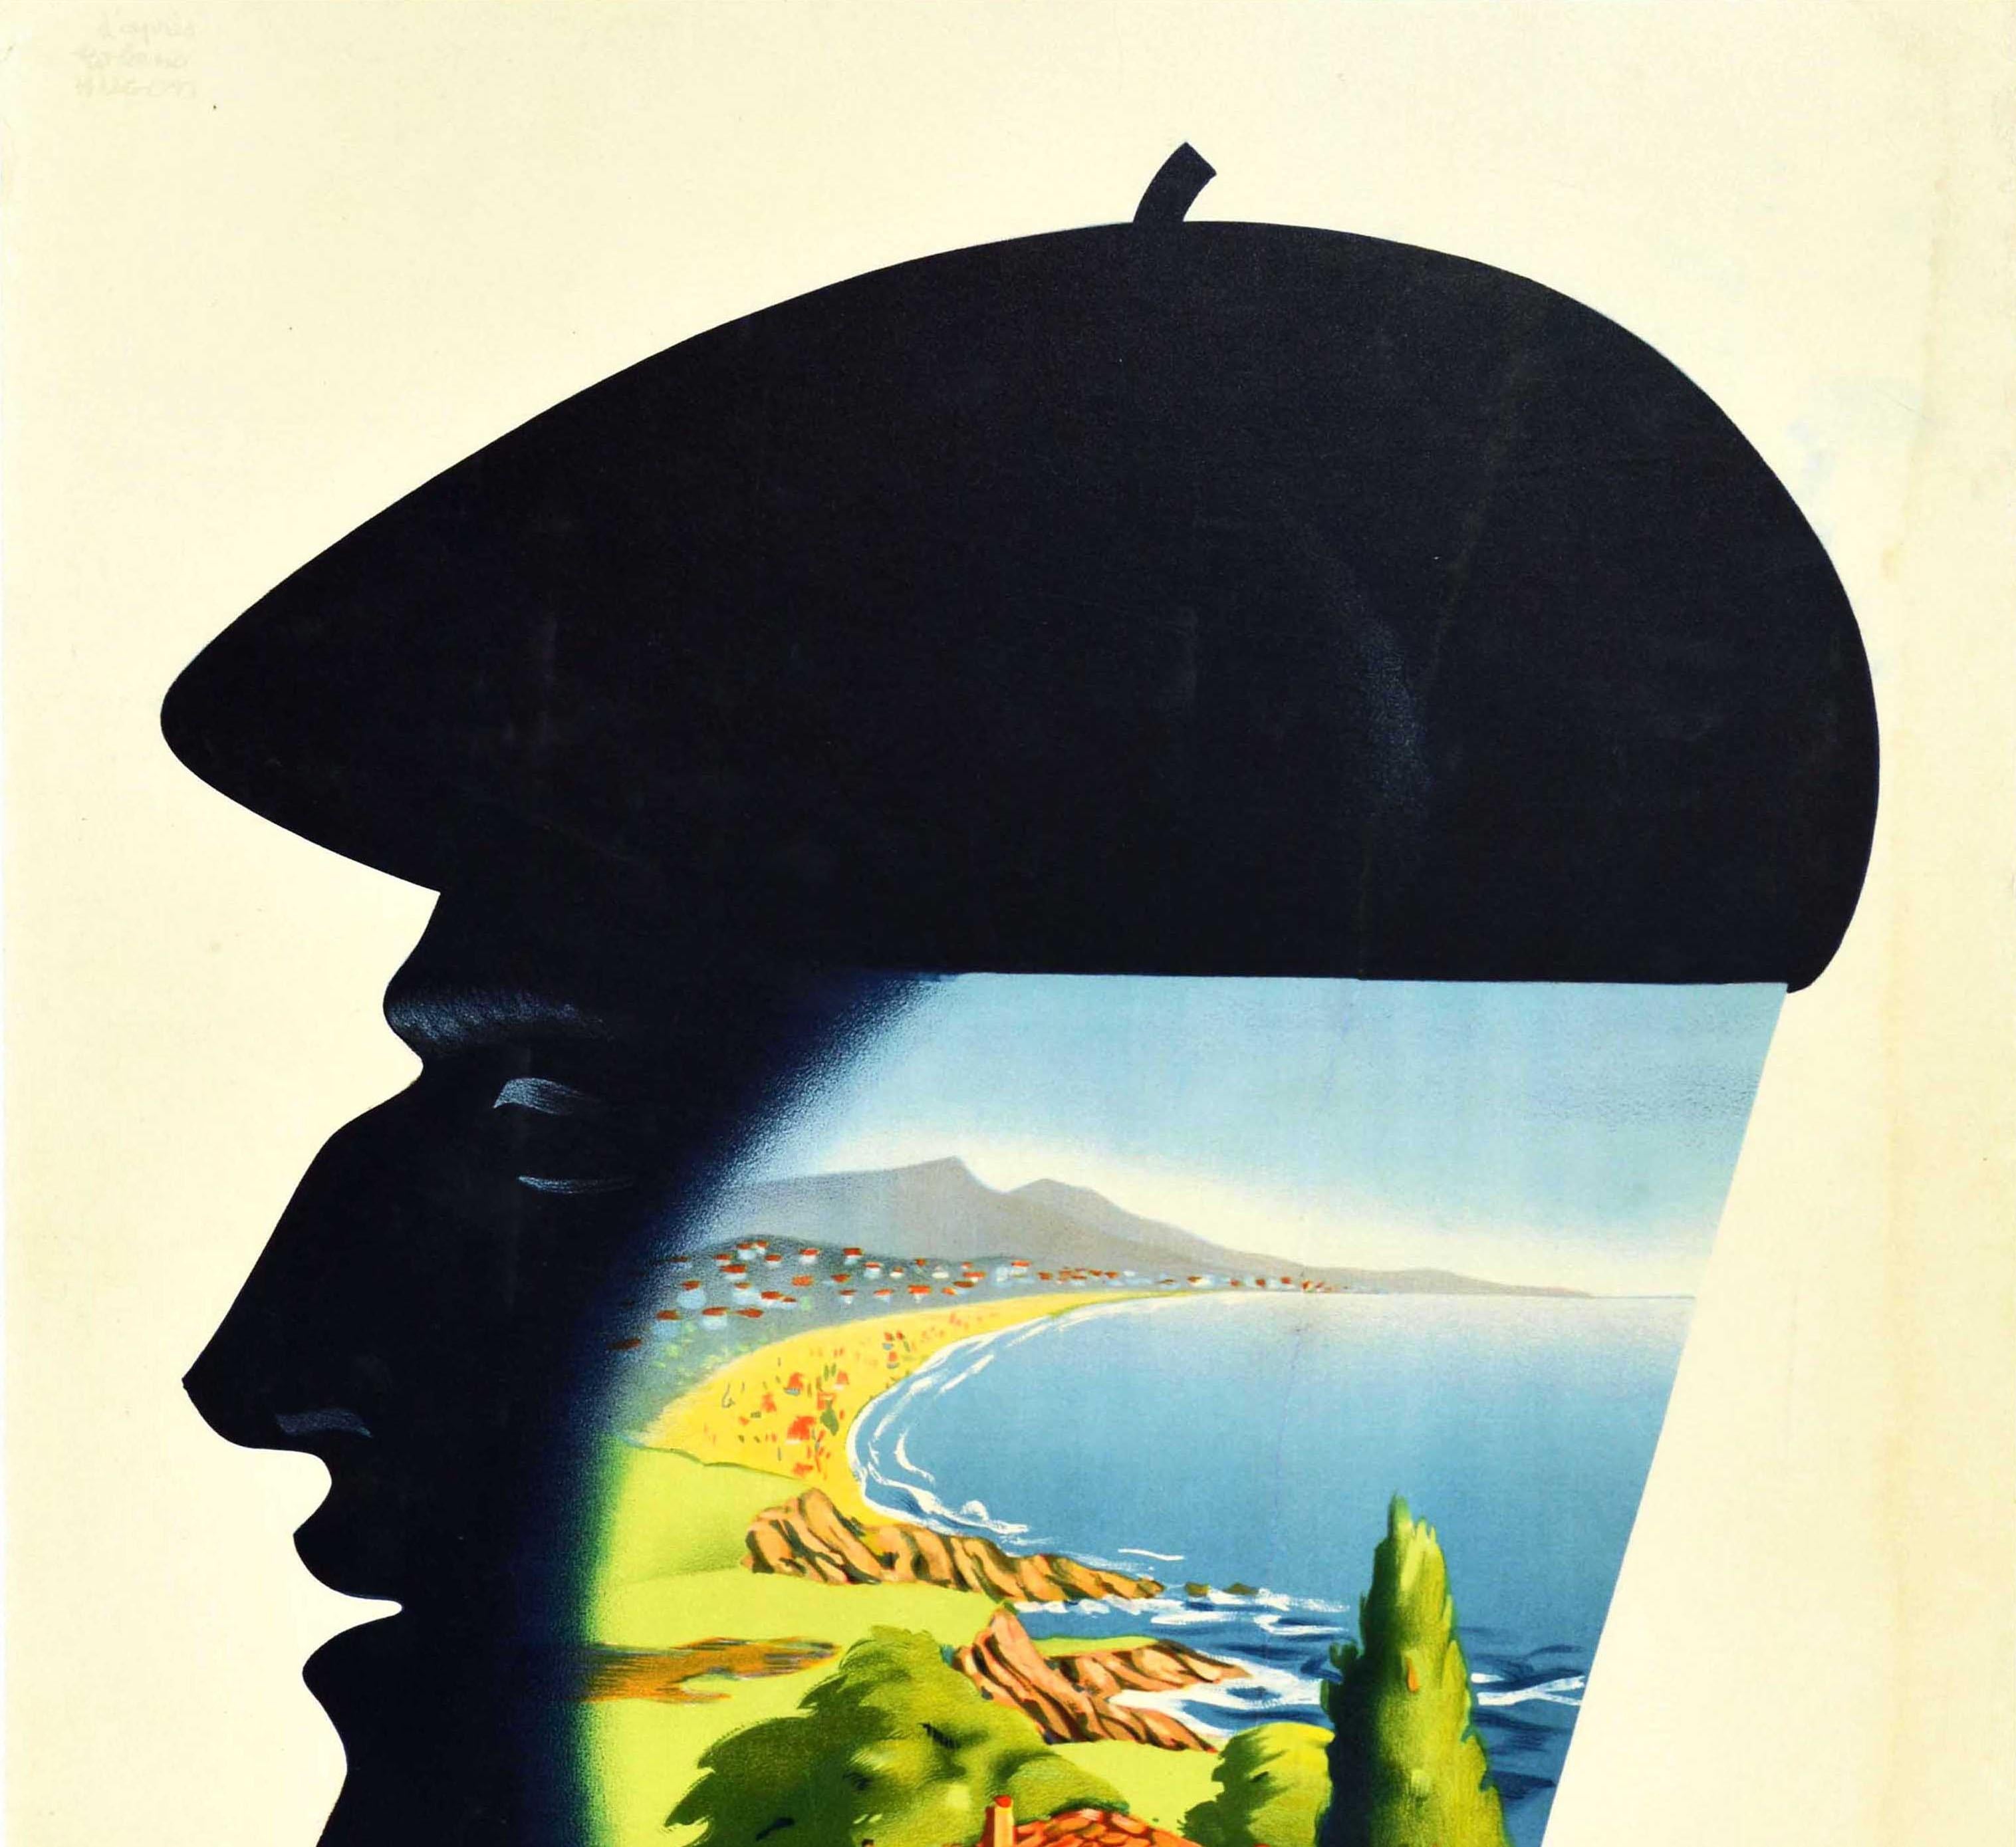 Original Vintage Poster For Cote Basque Coast SNCF French Railway Travel Design - Print by Unknown